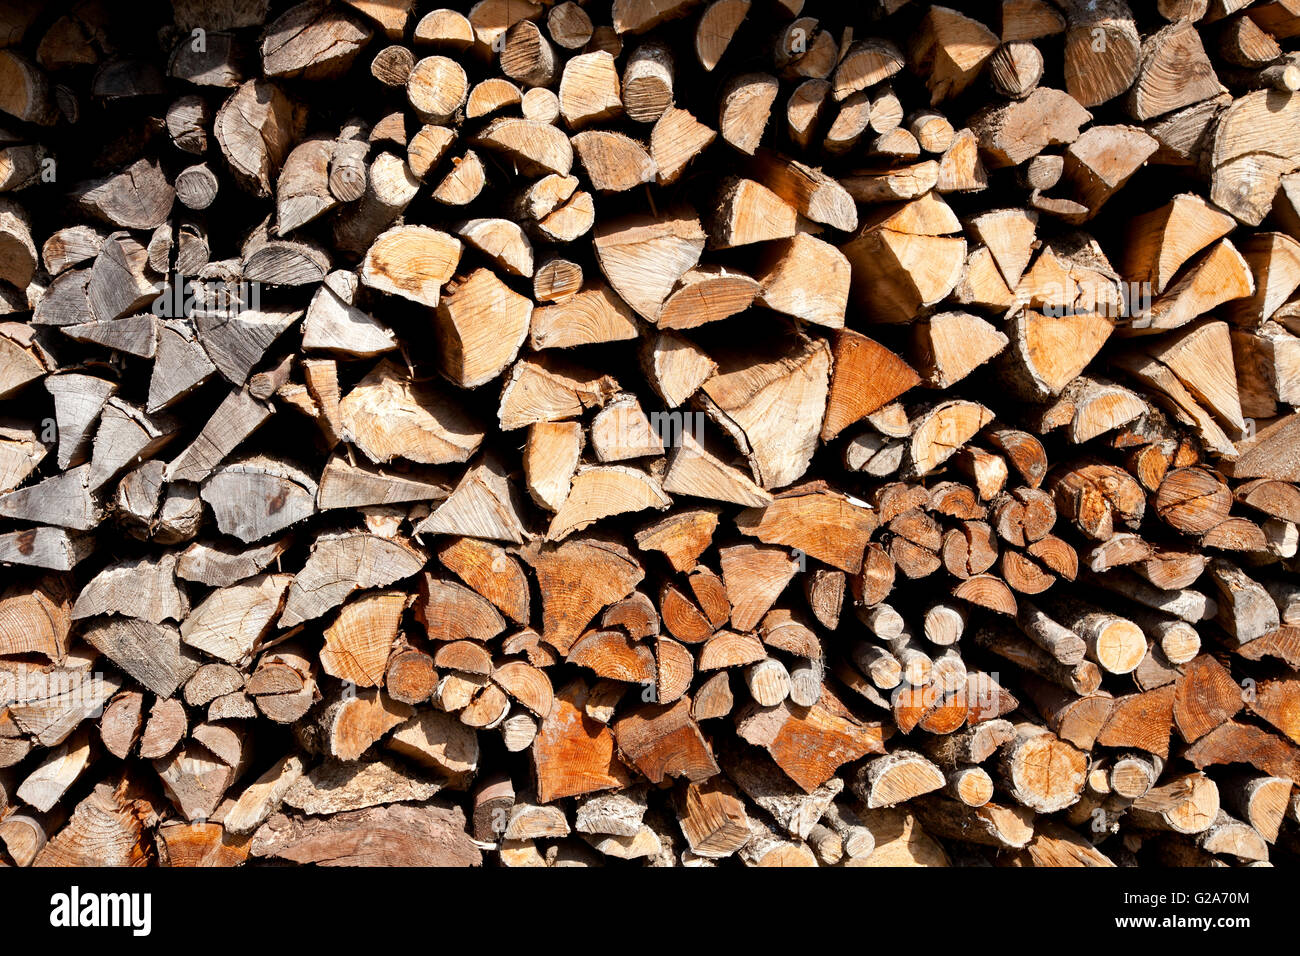 Woodland management in the Black Forest, processed logs stacked in the woodland by people using their local woodlands sustainably for their own uses Stock Photo